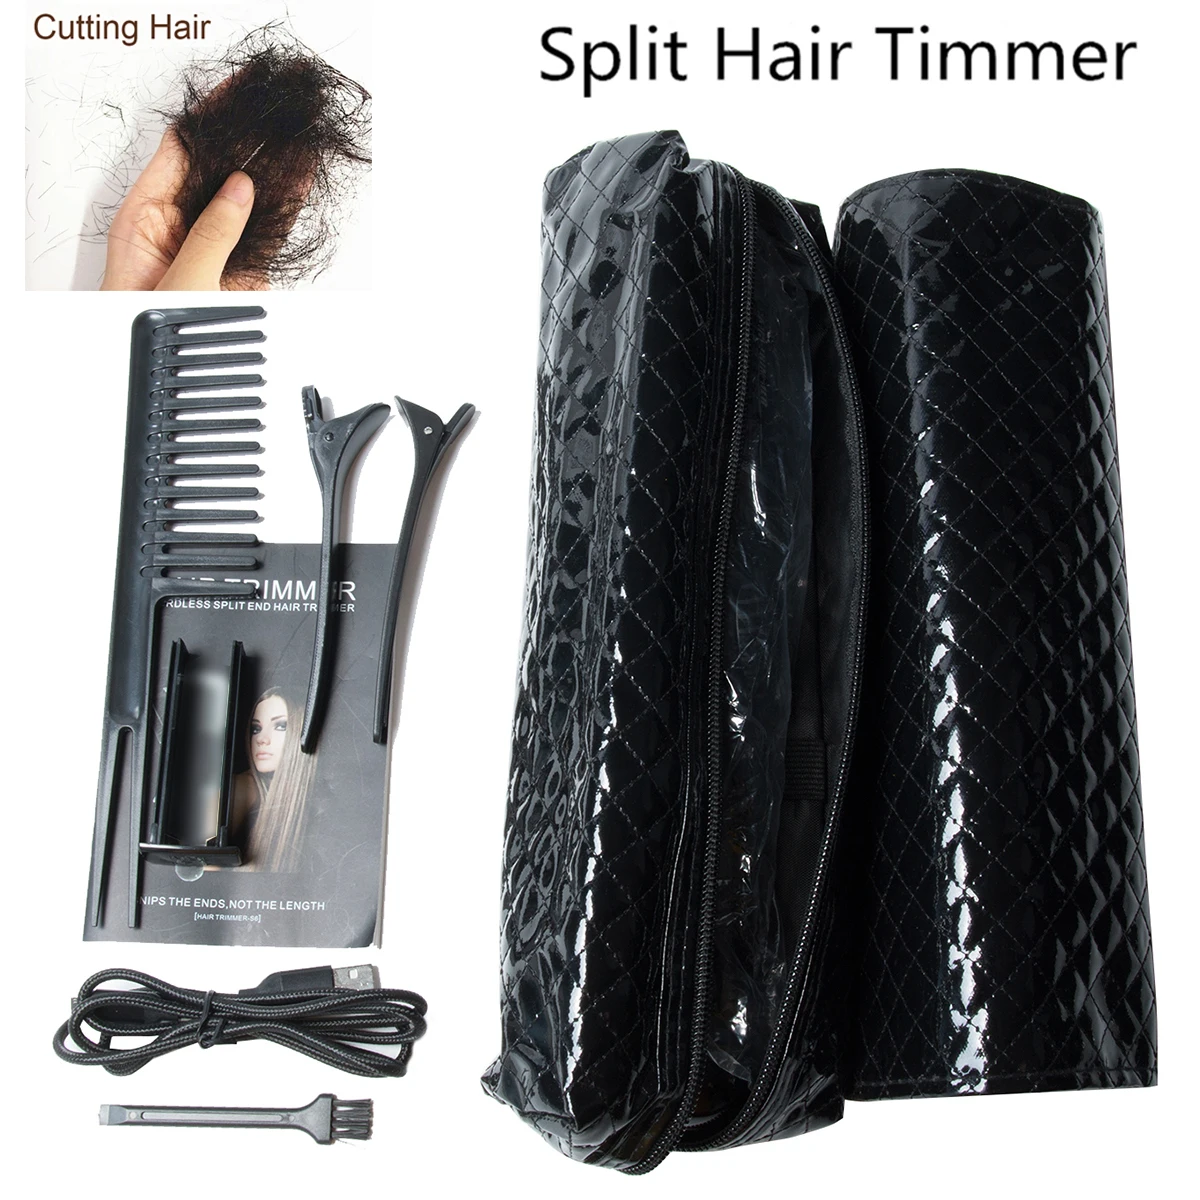 Split Hair Trimmer USB Charging Smooth End Cutting Straight Hair  Cutter Care Tools Hair Styler Clipper Split Trimmer enlarge